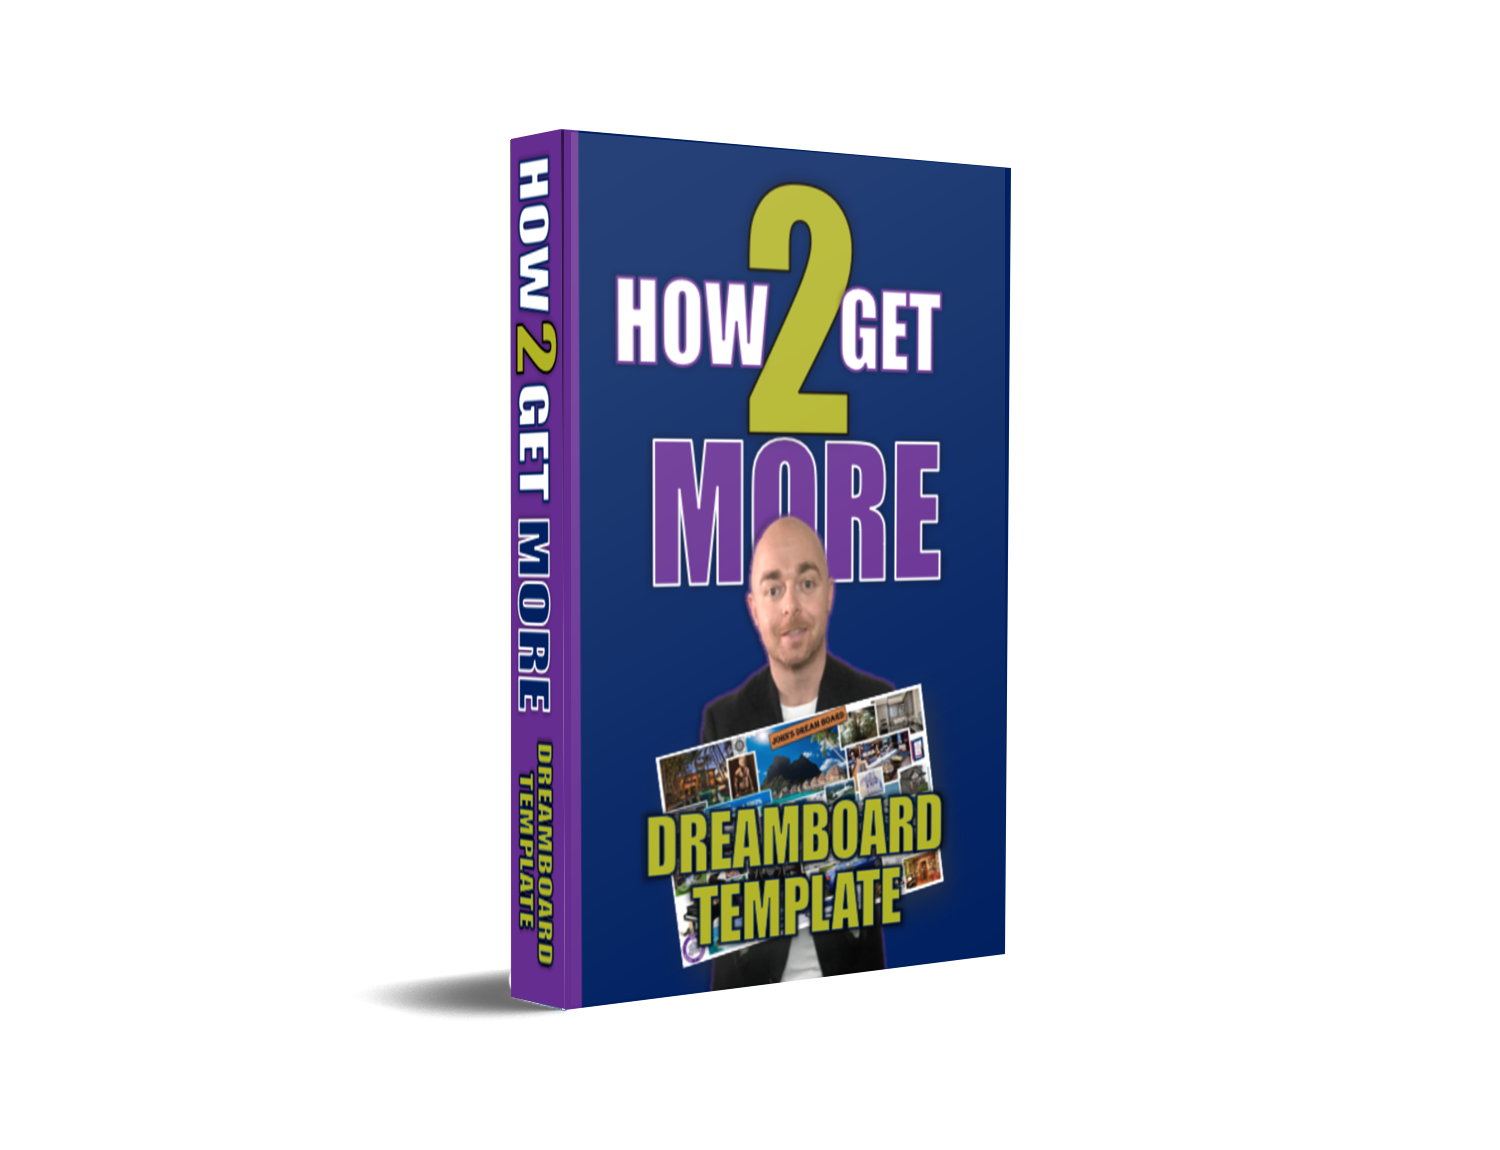 How 2 Get More: Dreamboard Template